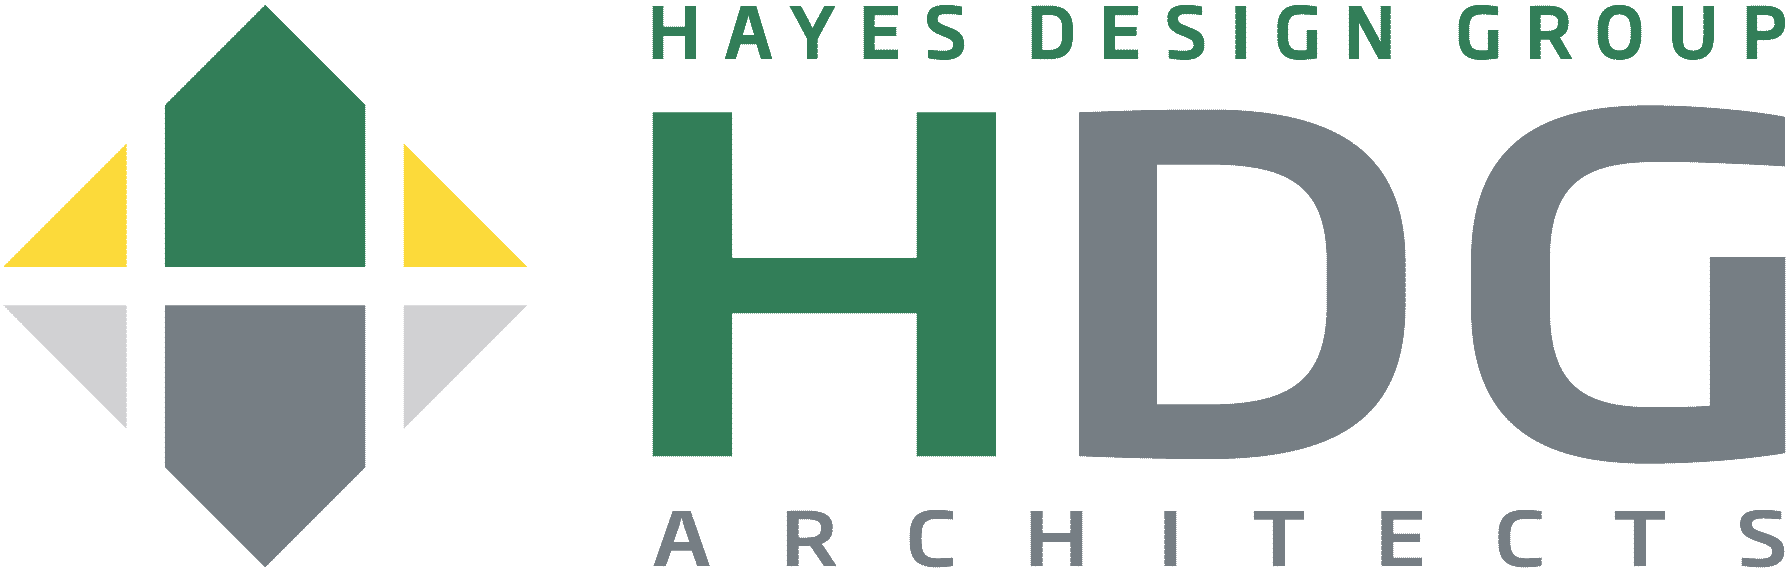 Hayes Logo - Home